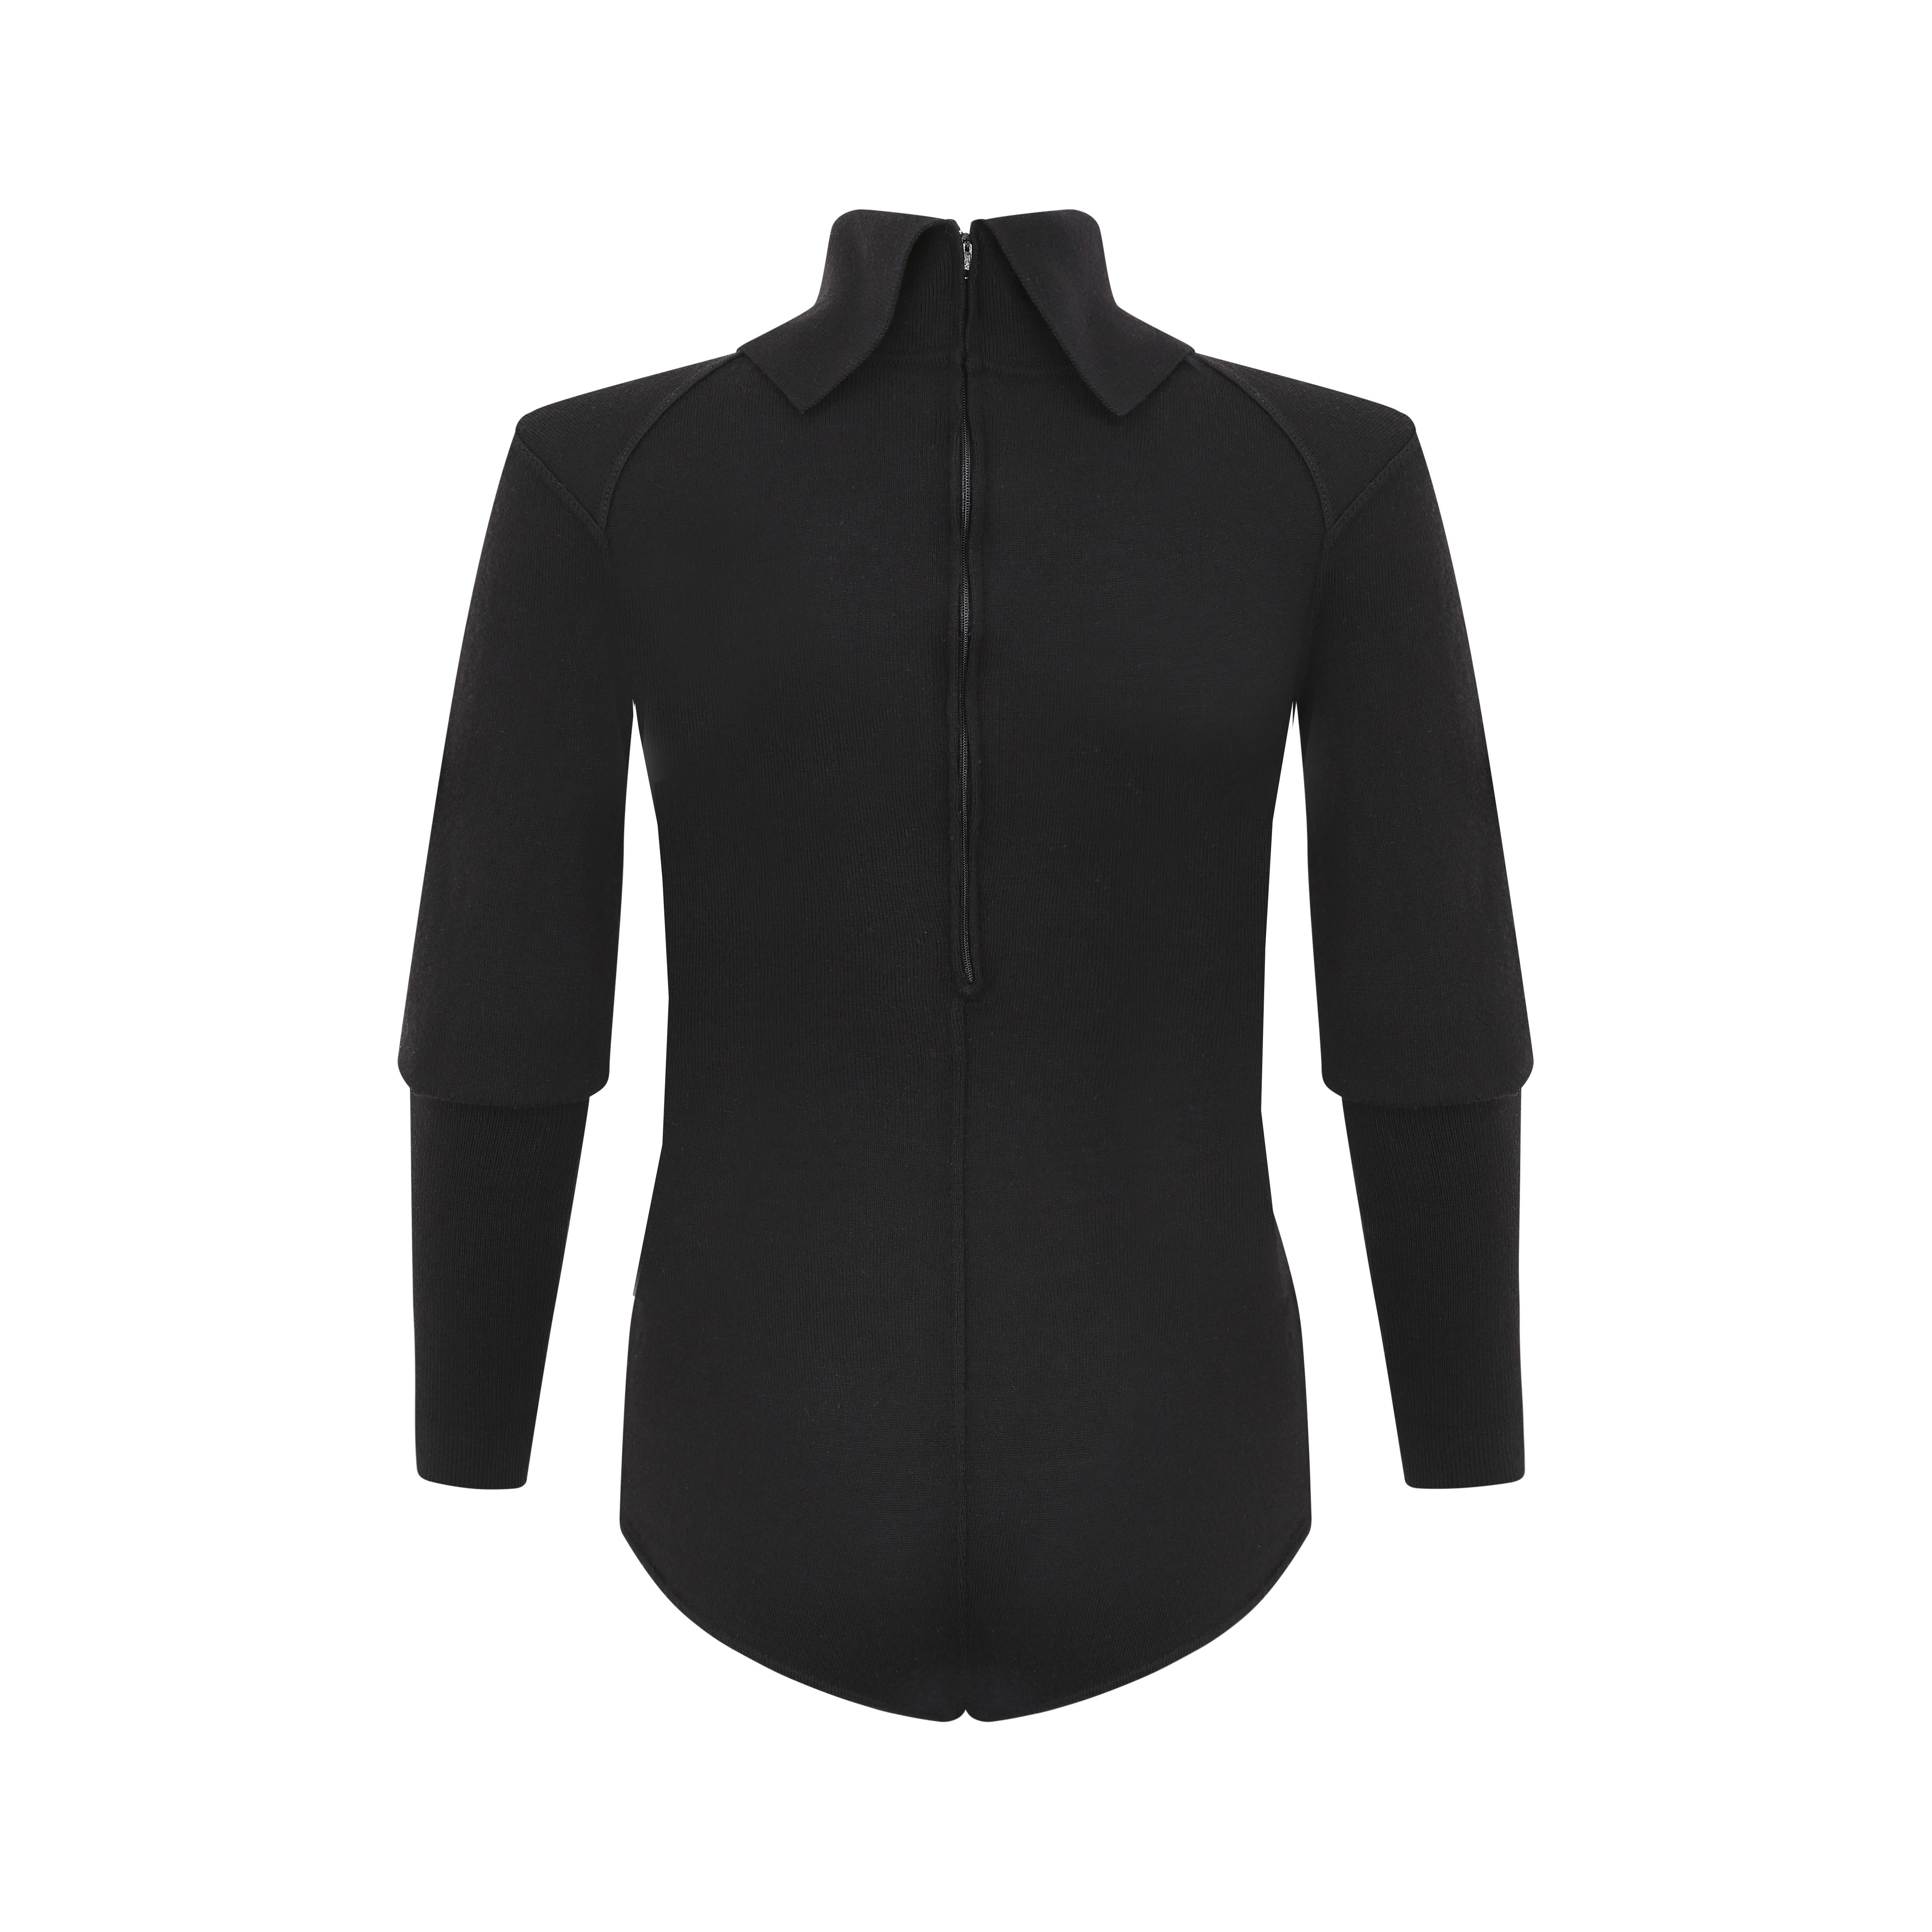 1980s Alaia Black Long Sleeve Bodysuit In Excellent Condition For Sale In London, GB